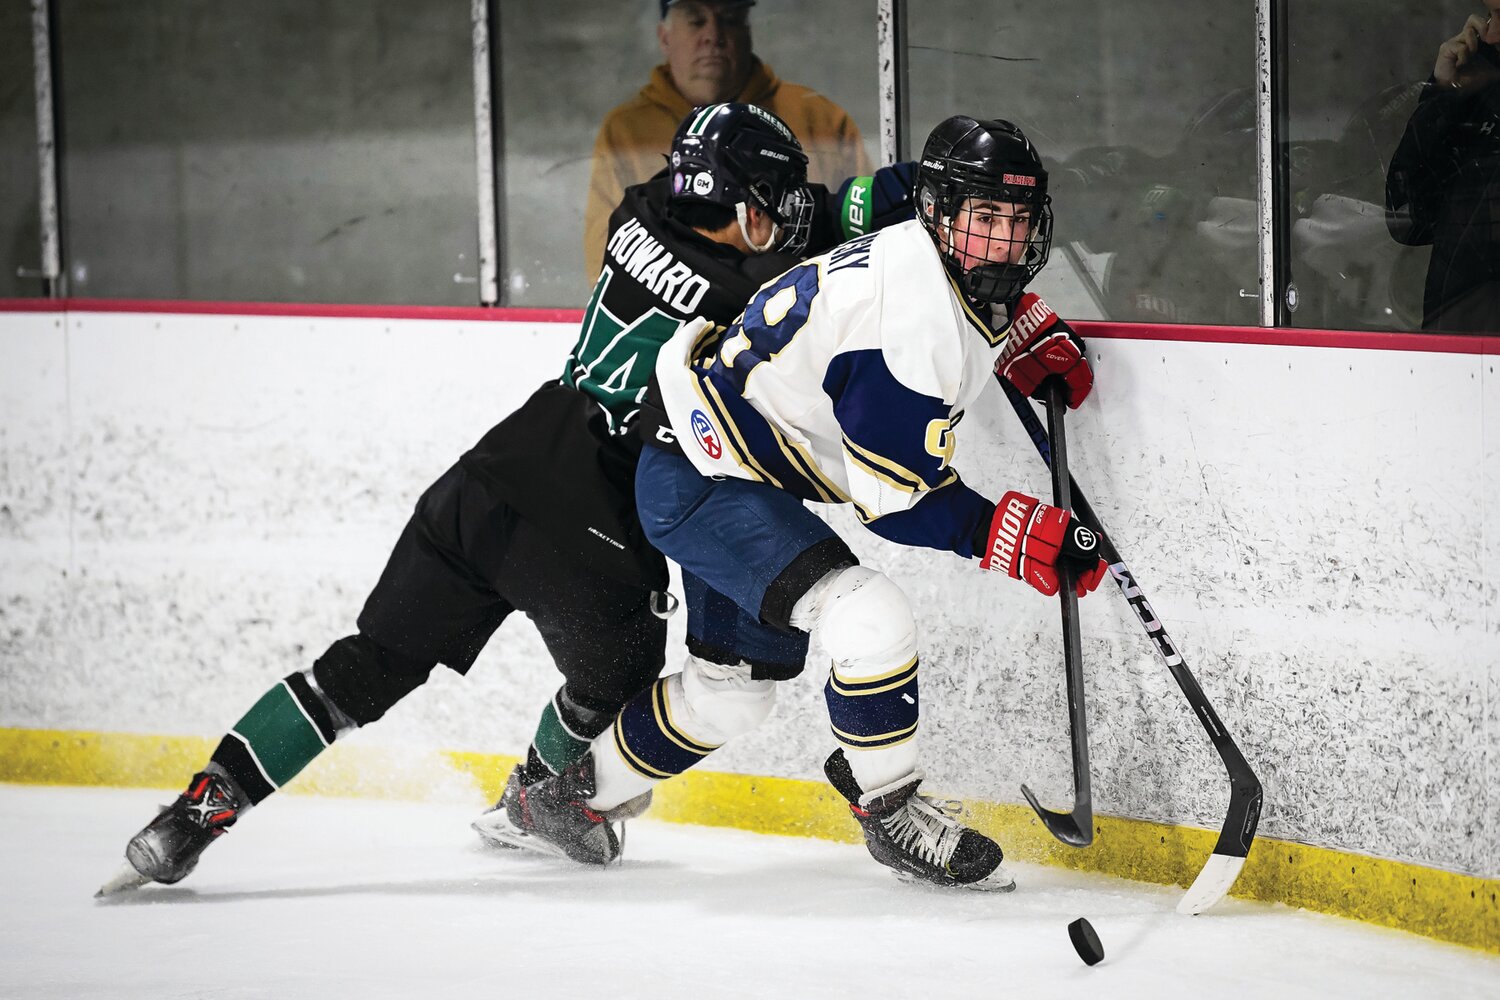 Council Rock South’s Chase Tovsky works the puck out of the corner despite a backcheck from Pennridge’s Dhilan Howard.